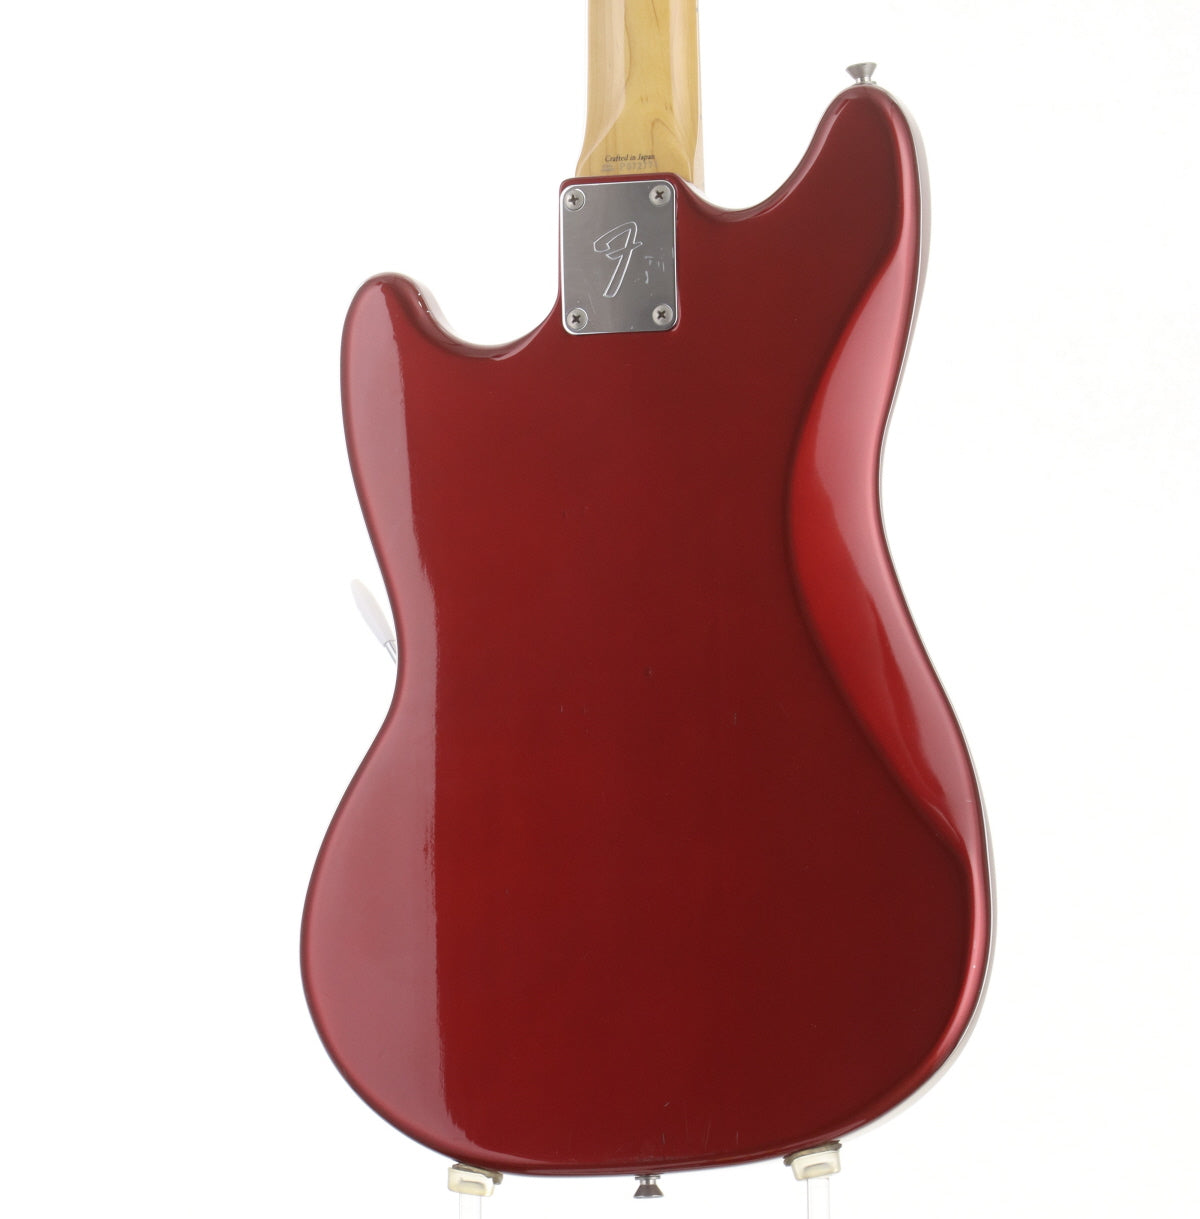 [SN P072771] USED FENDER JAPAN / MG69/MH Old Candy Apple Red [3.29kg / 1999-2002] Fender Mustang [08]